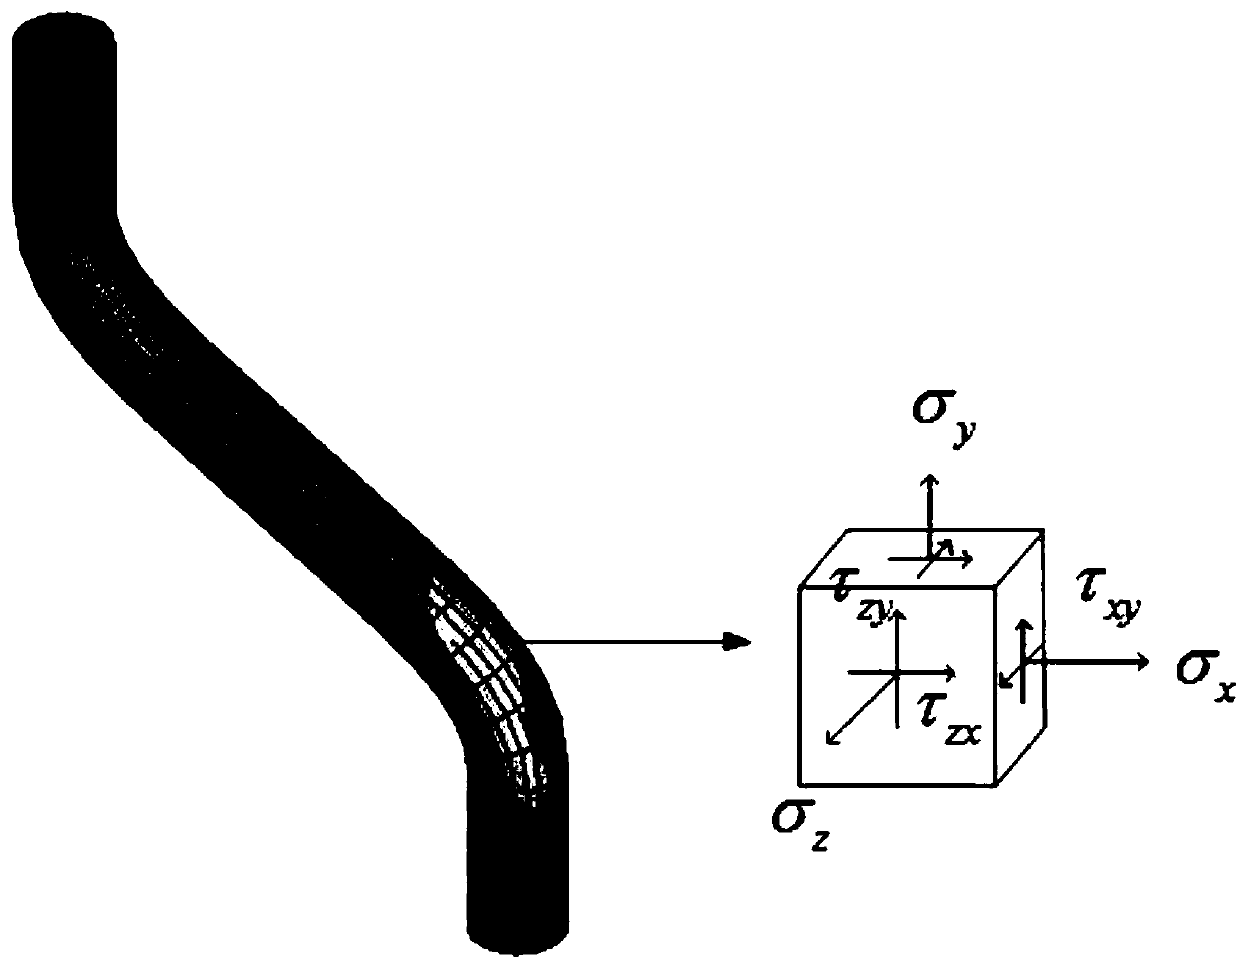 A Modeling Method for Cable Buckling